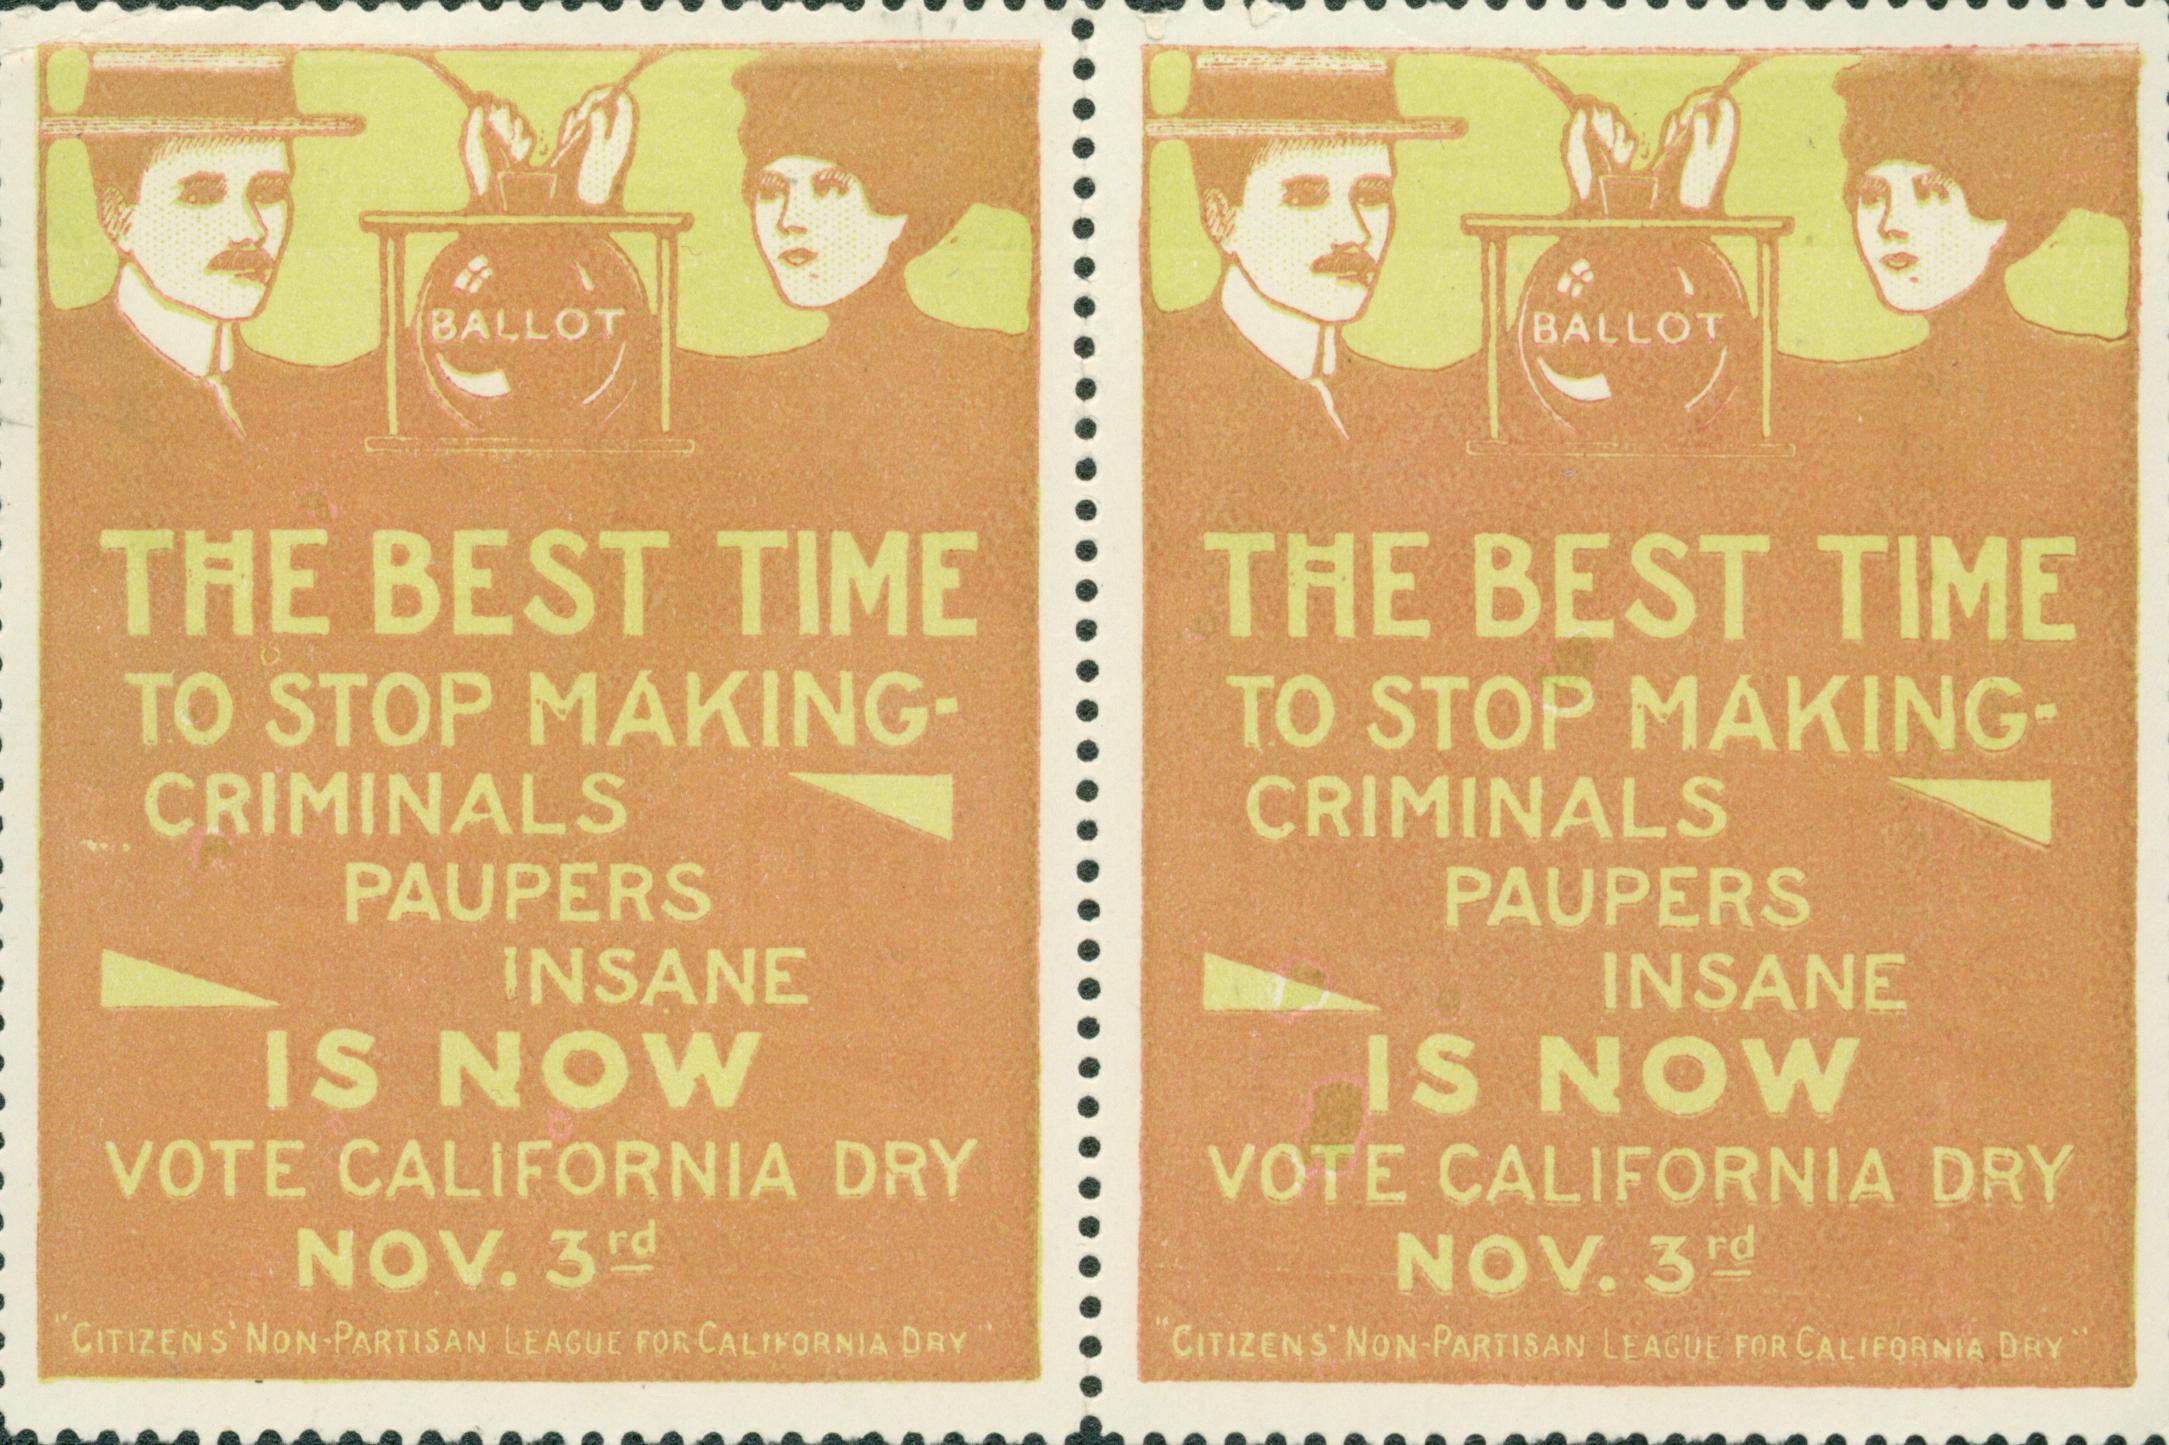 This stamp shows a man and a woman voting above an exhortation to vote for prohibition in the next election